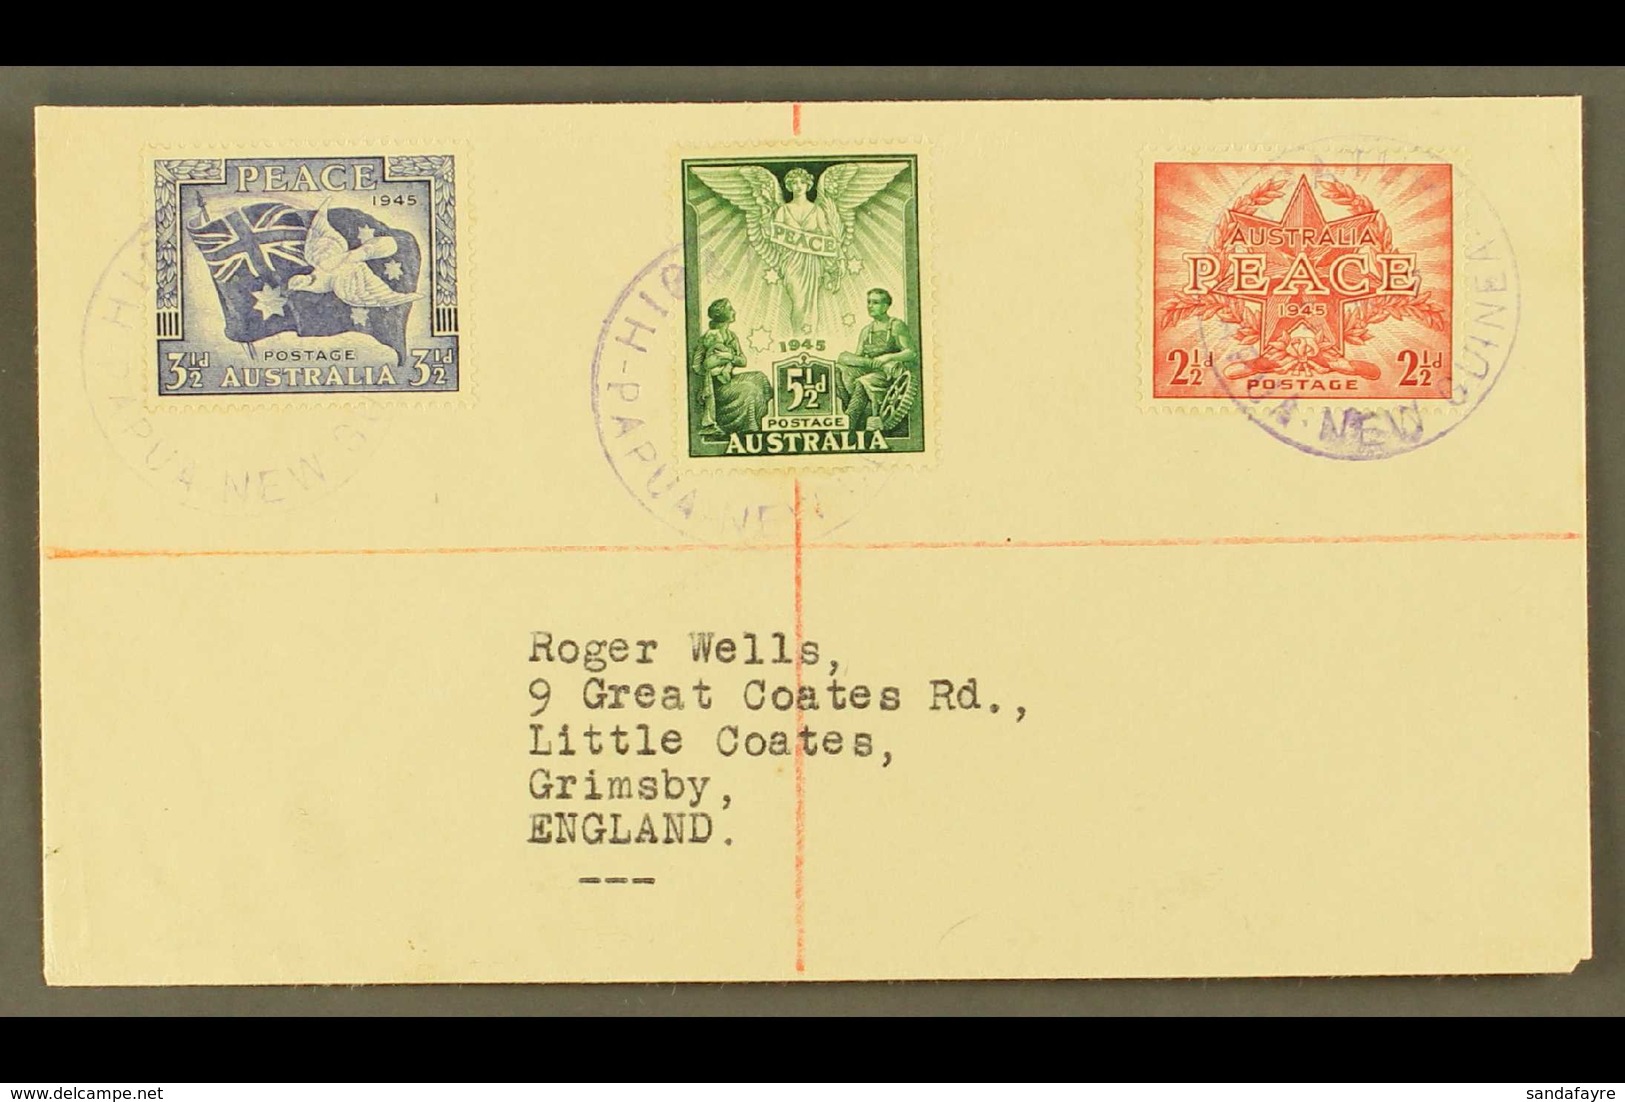 1947 Neat "Roger Wells" Envelope To England, Bearing Australia Peace Set, Tied By Fine HIGATURU Cds's In VIOLET.  For Mo - Papúa Nueva Guinea